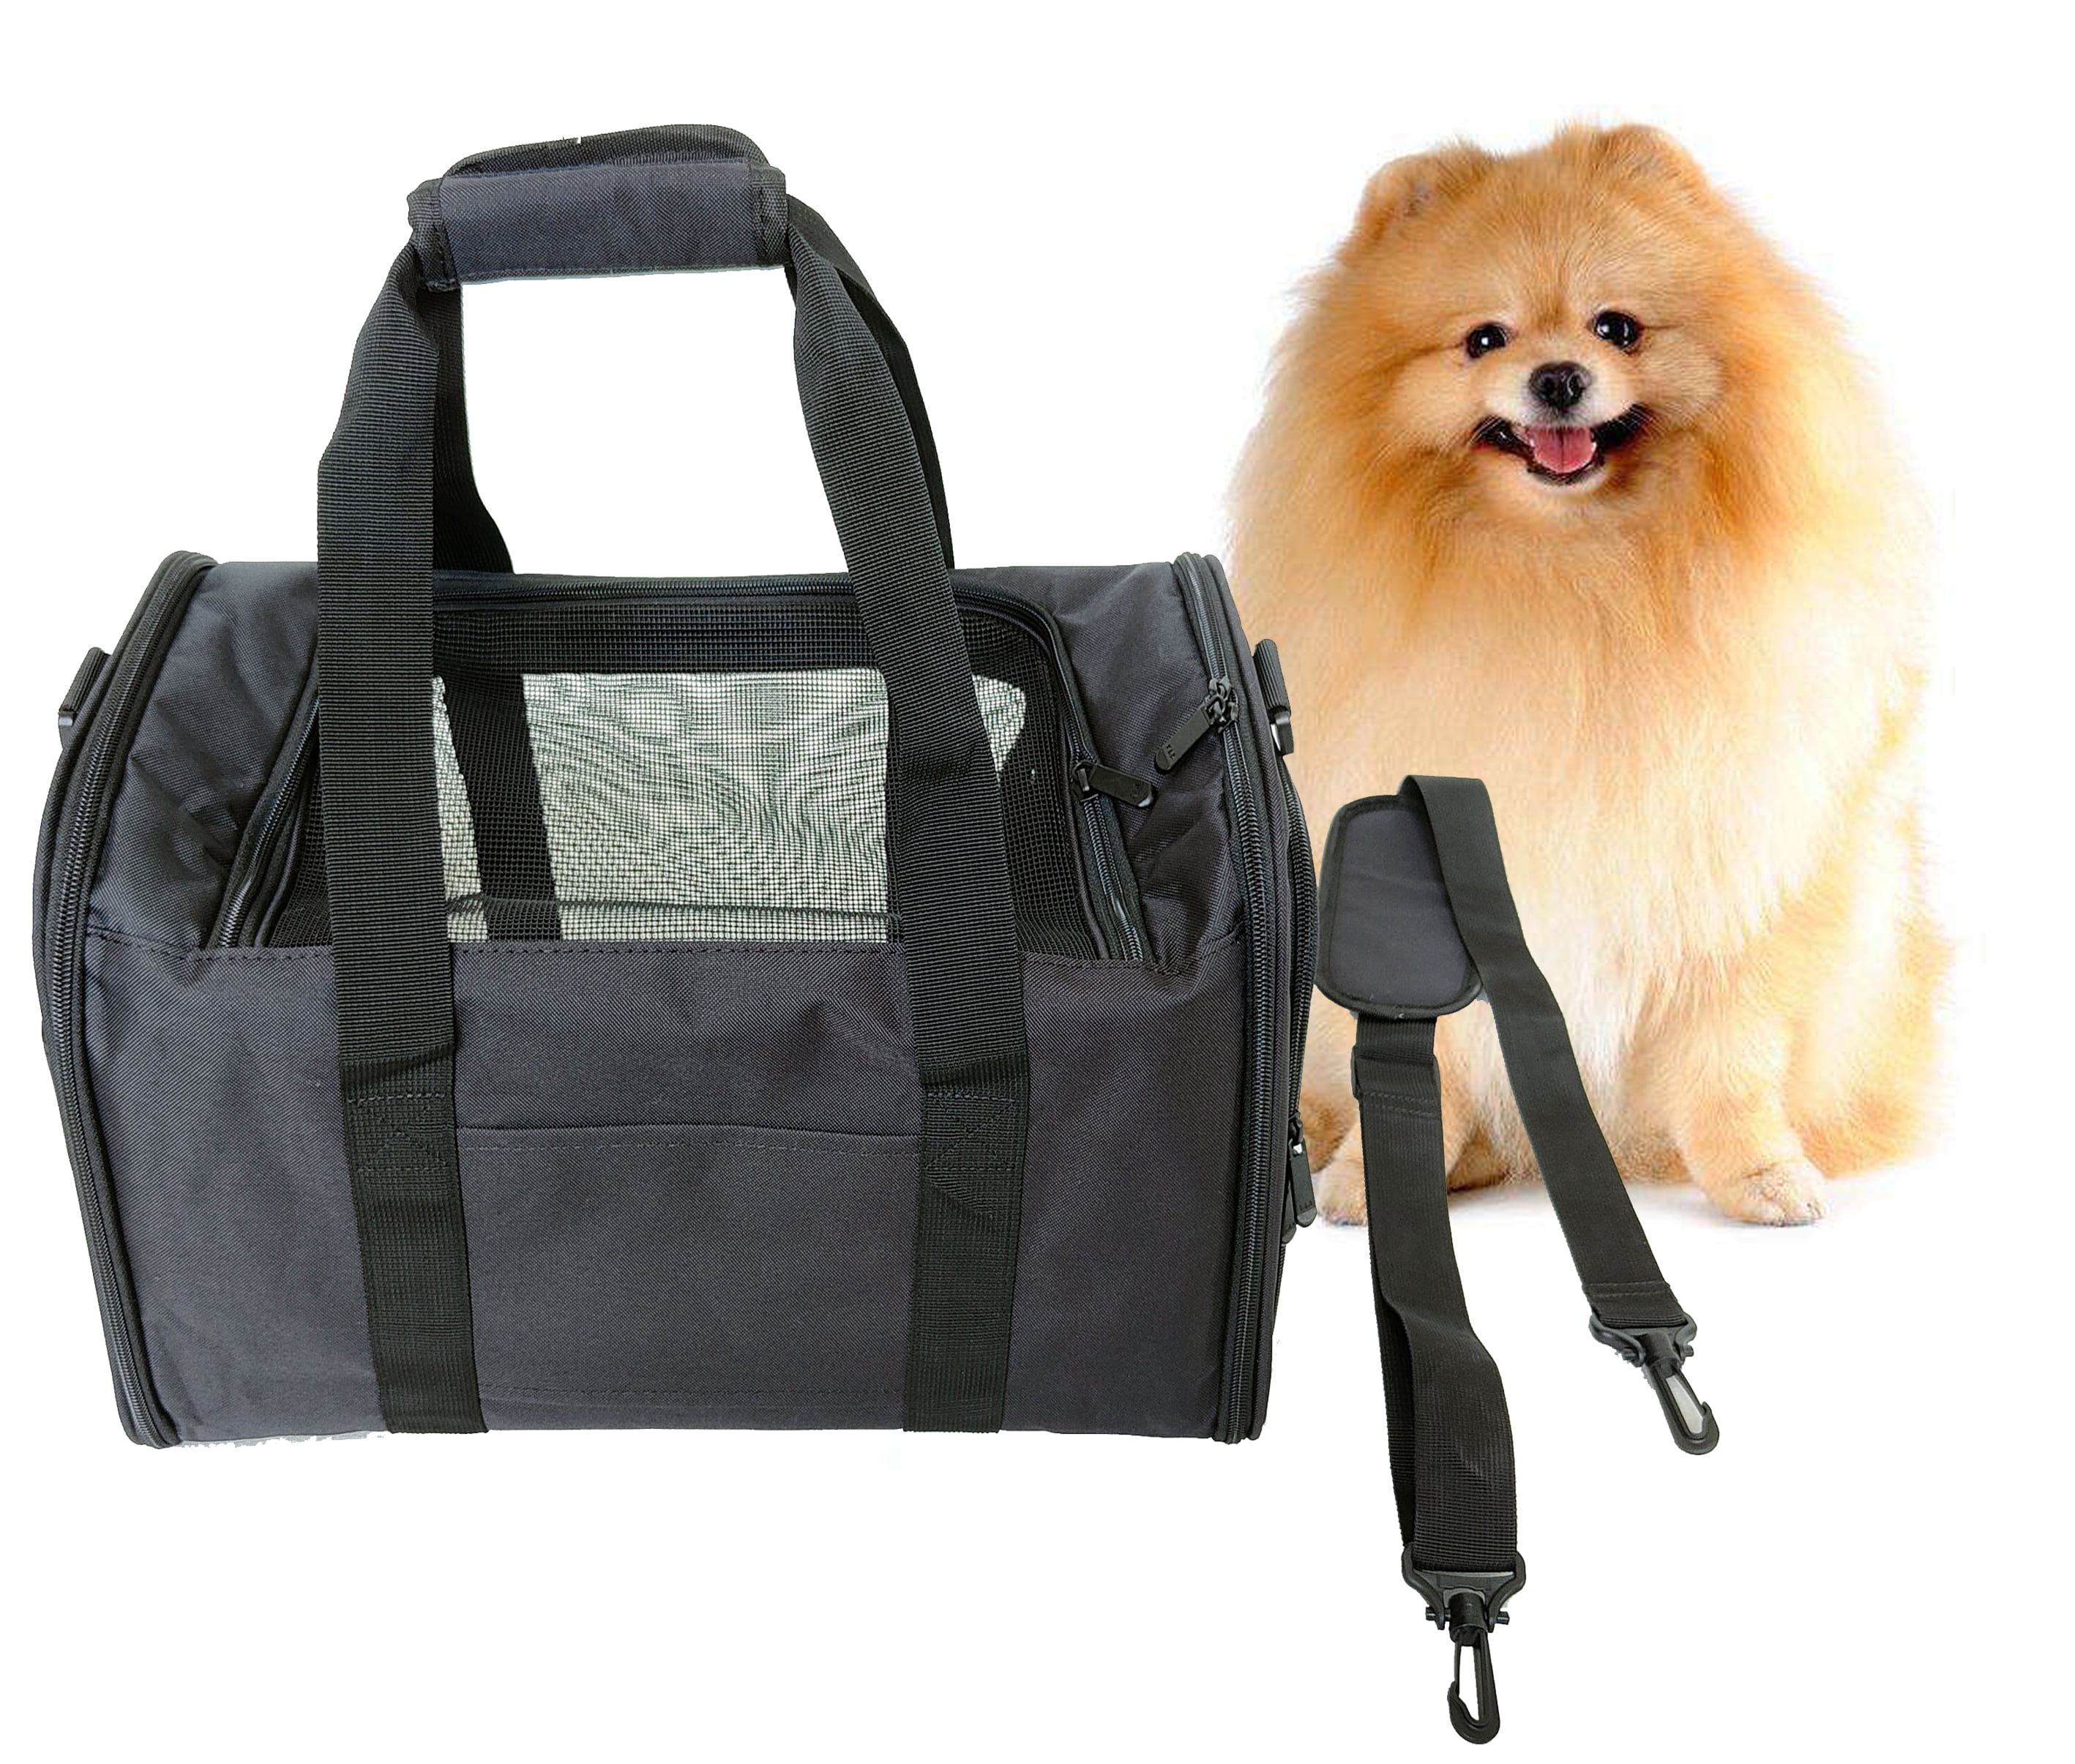 Petlo Pet Carrier Bag with Mattress, Airplane Approved 